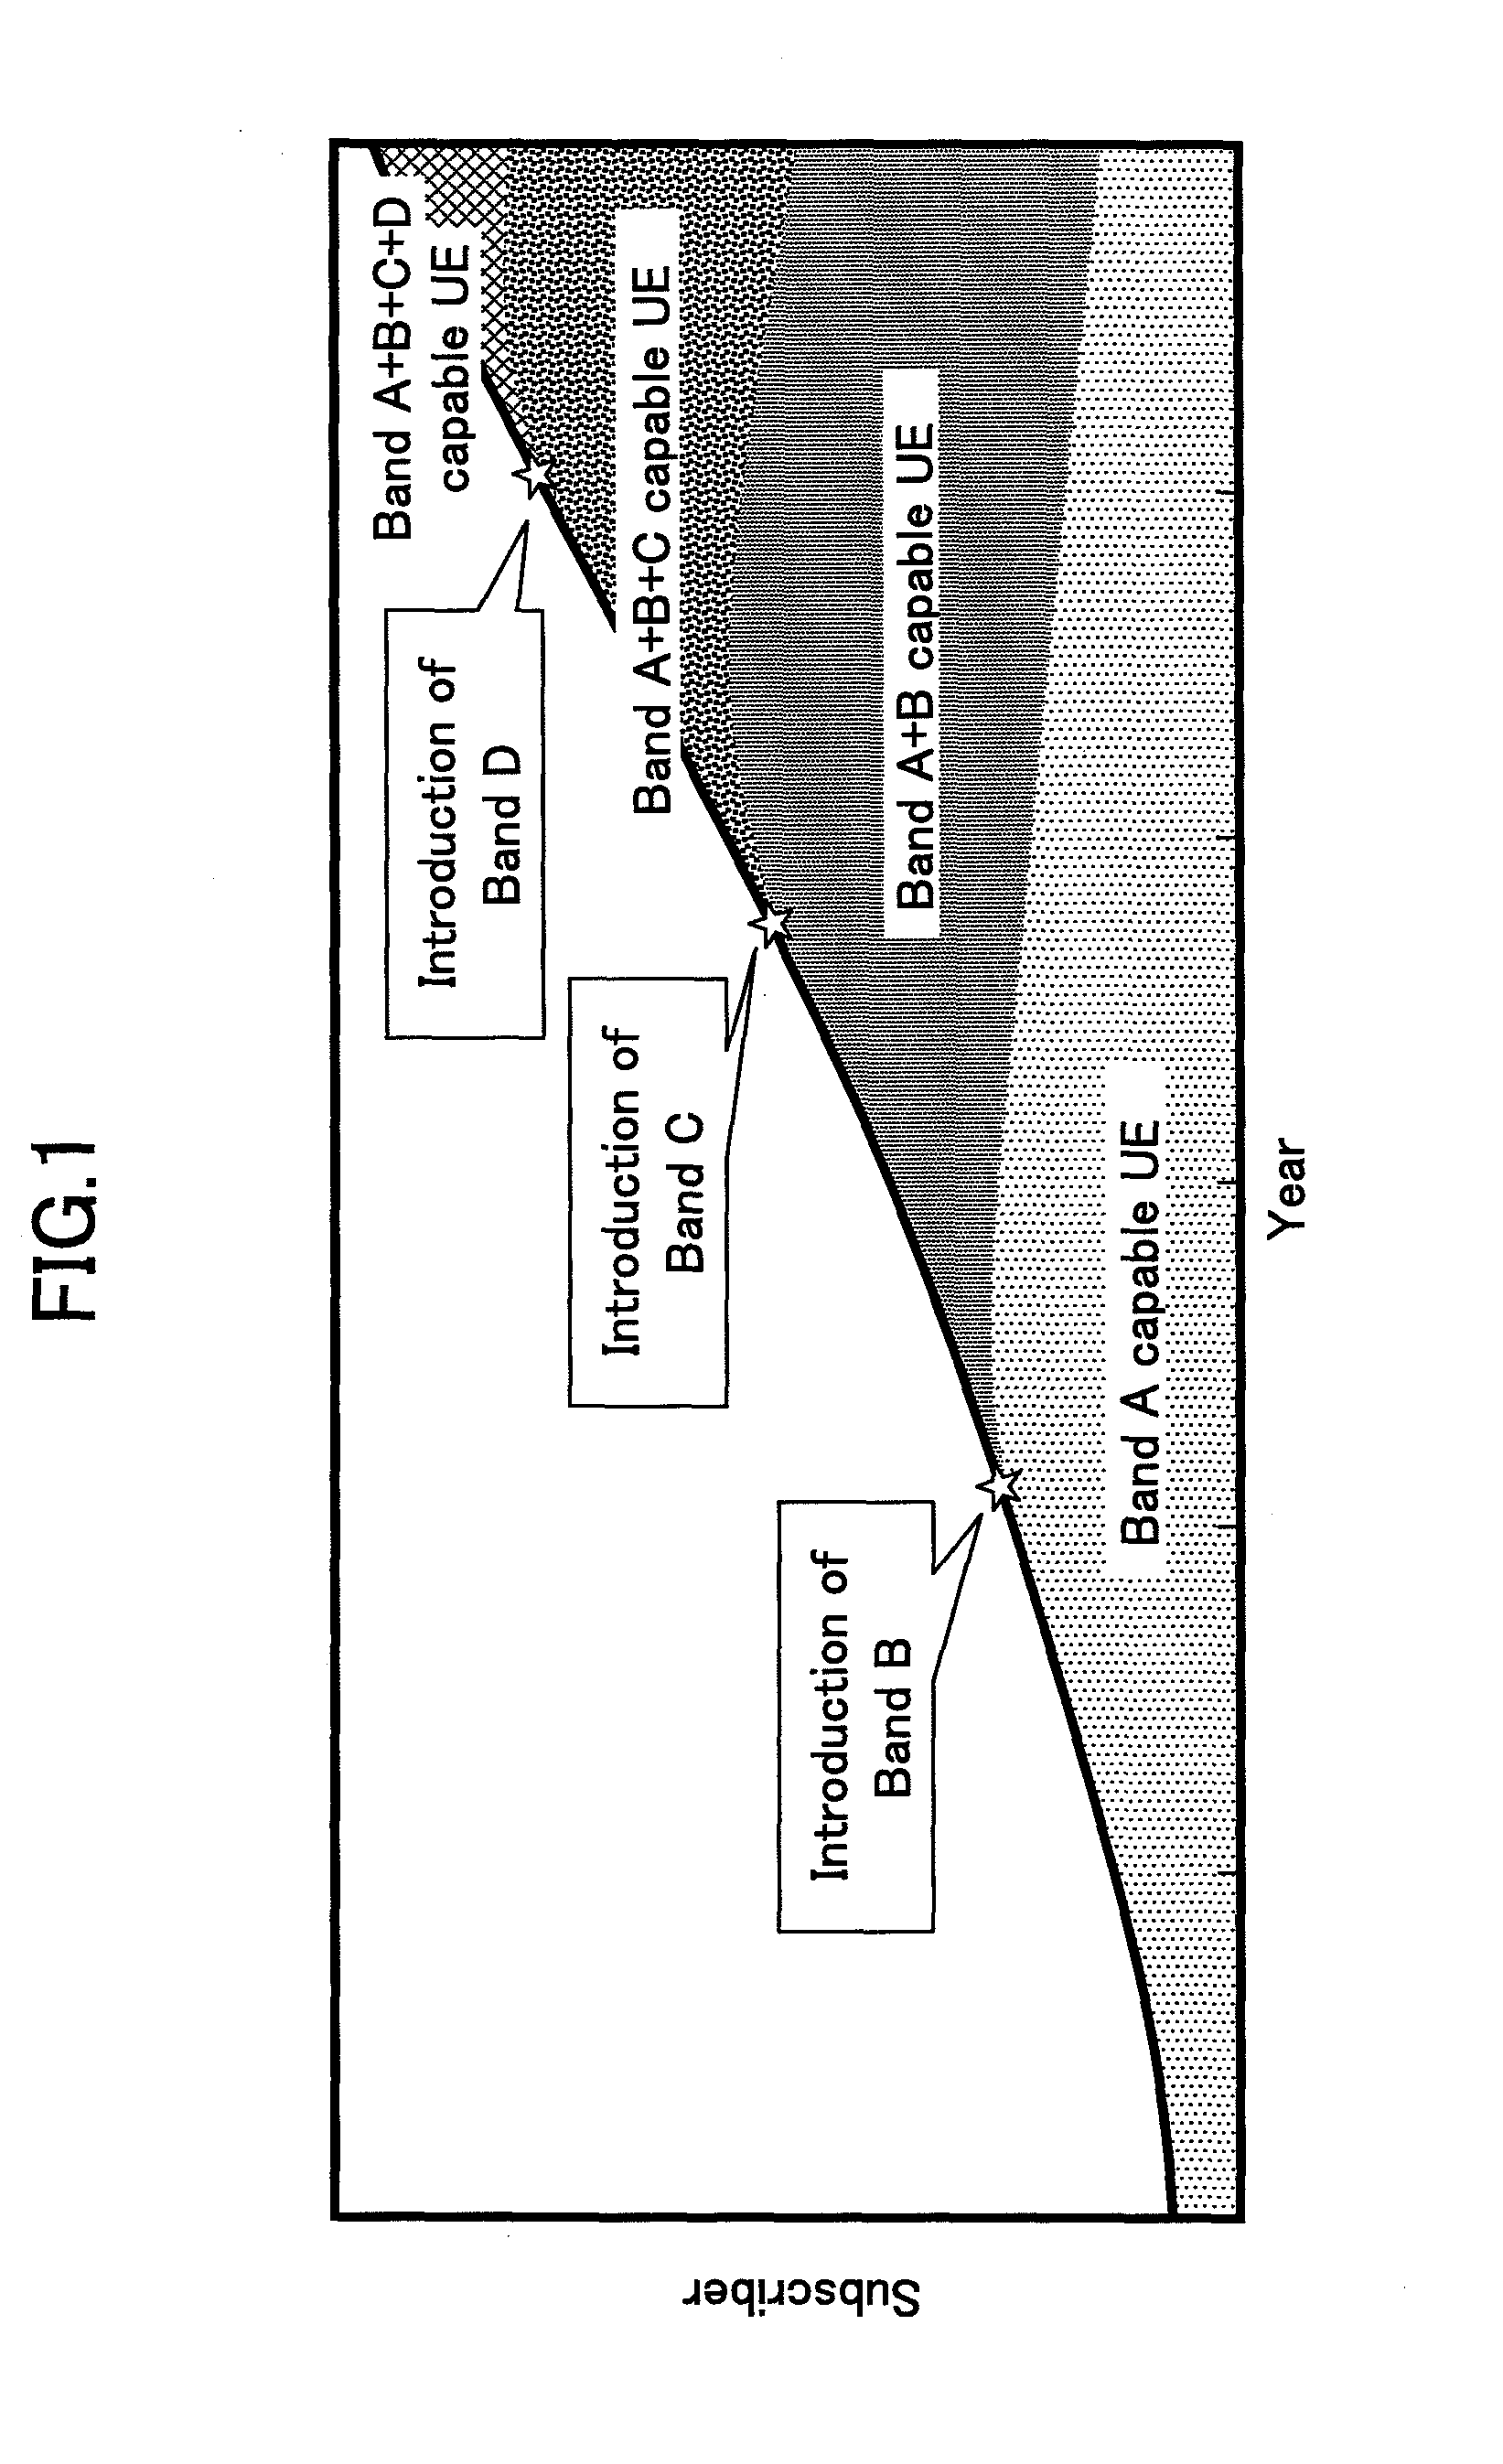 Base station, mobile station, and cell determination method